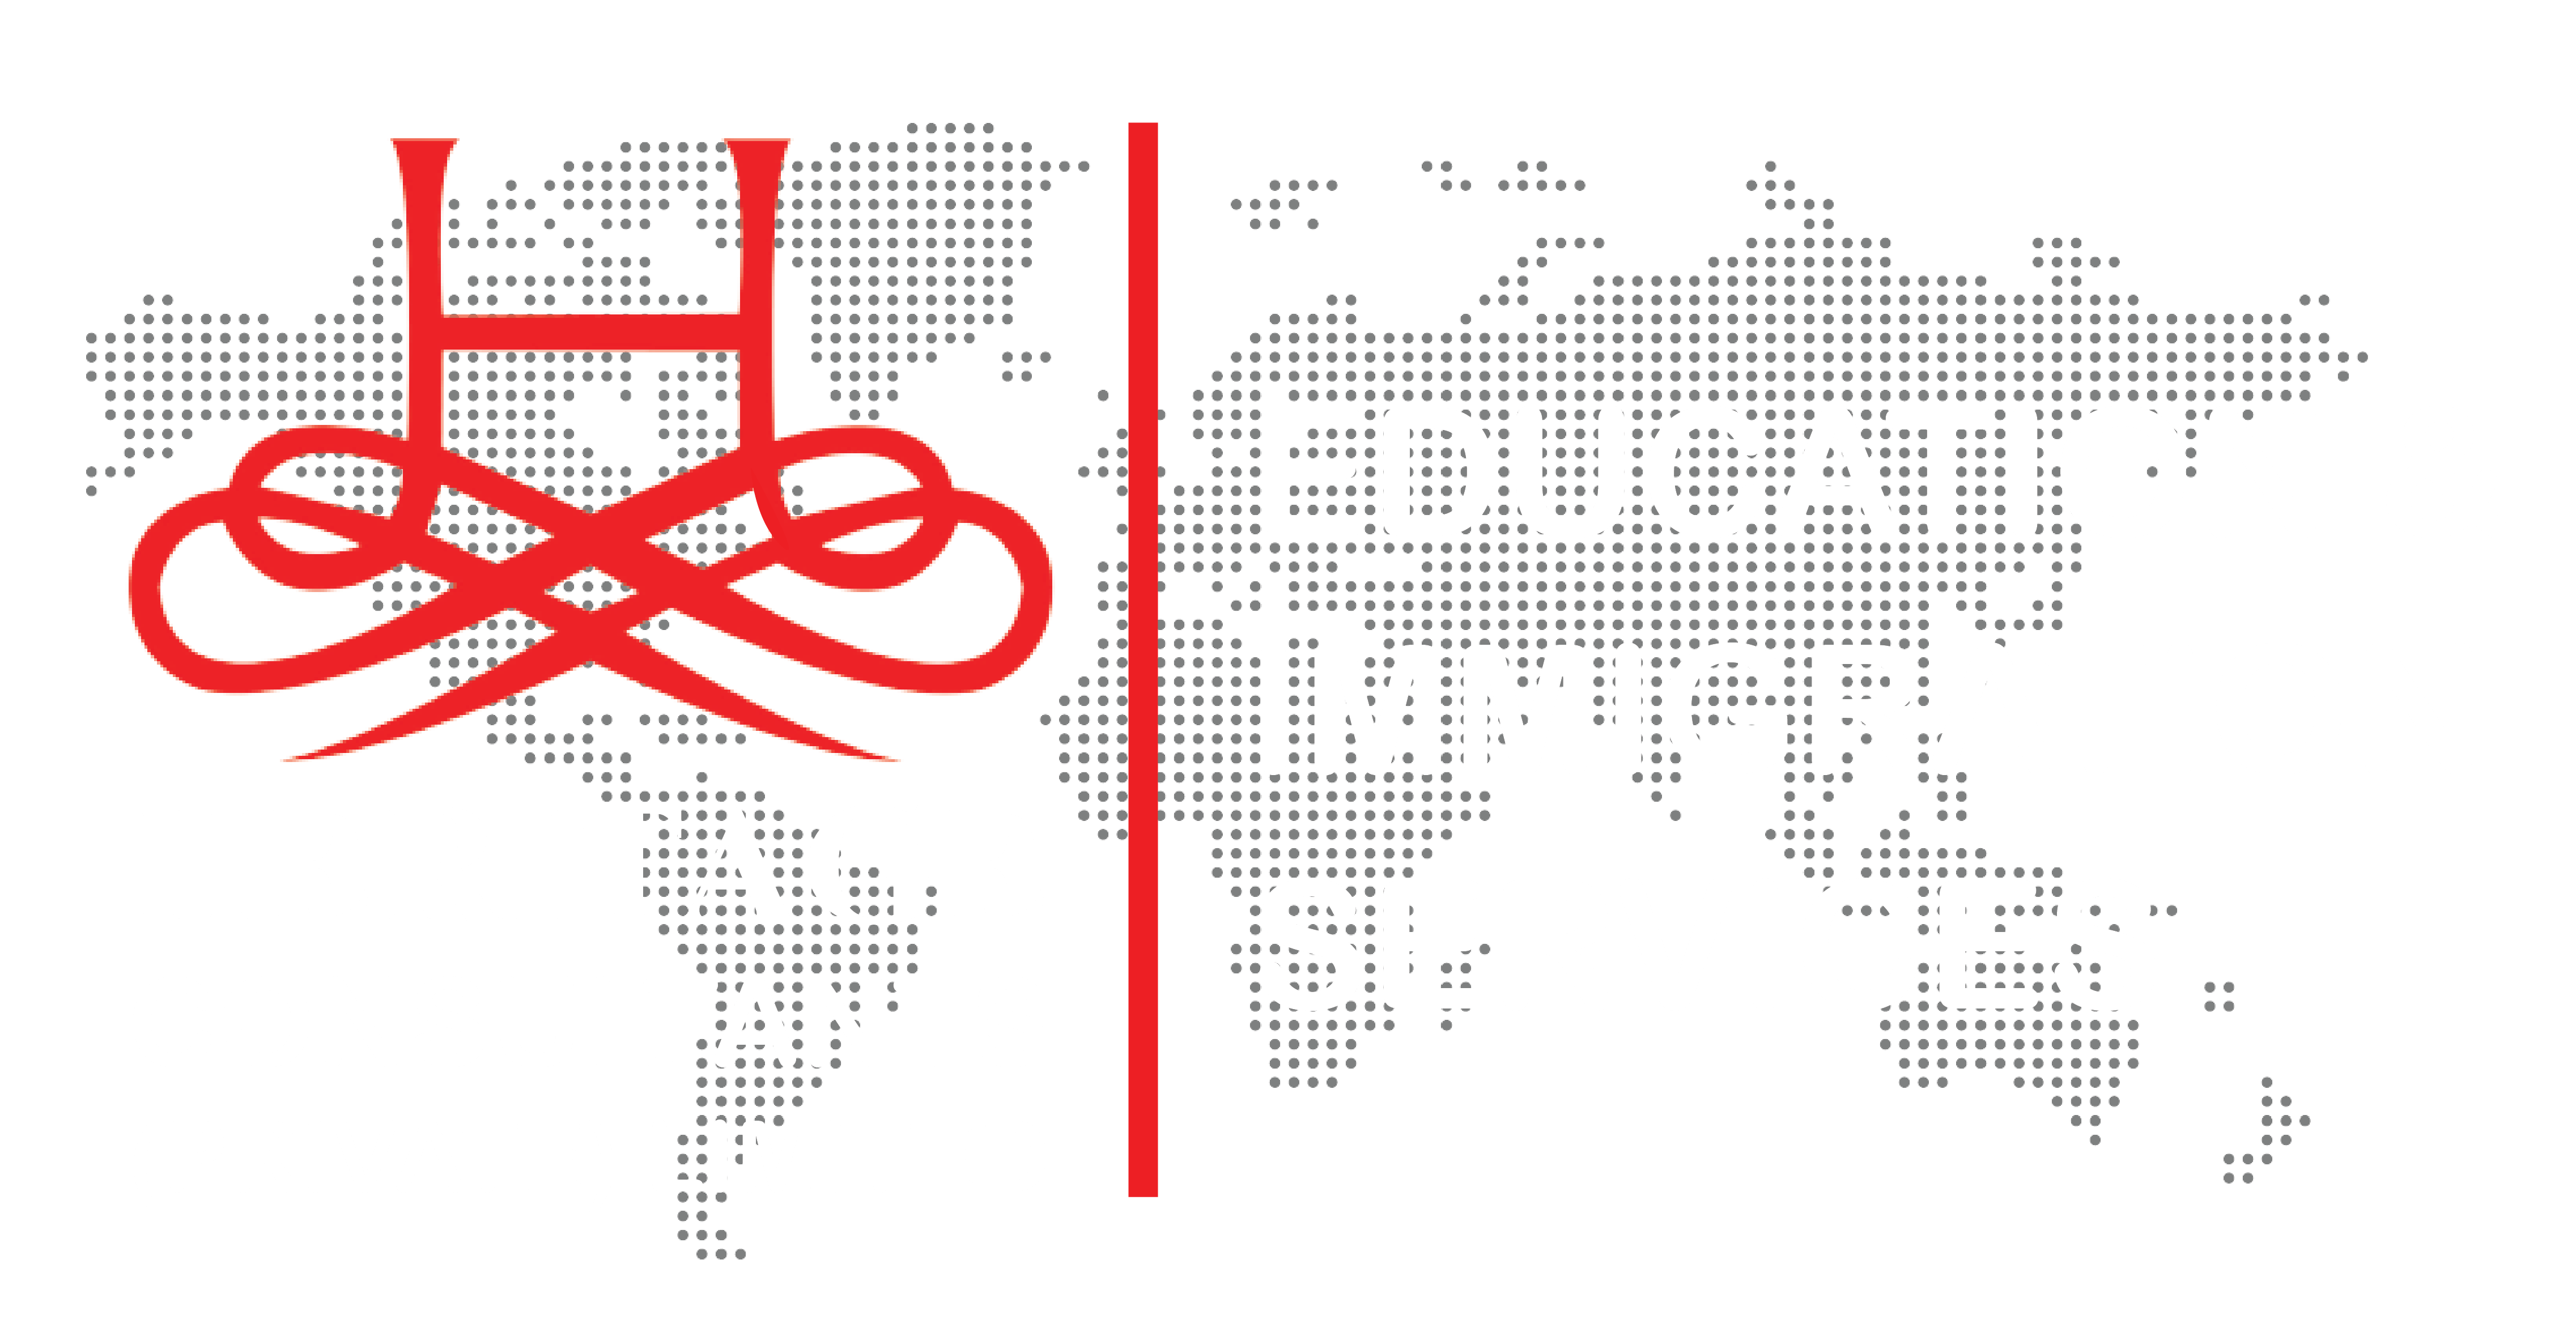 Heritage Group of Companies